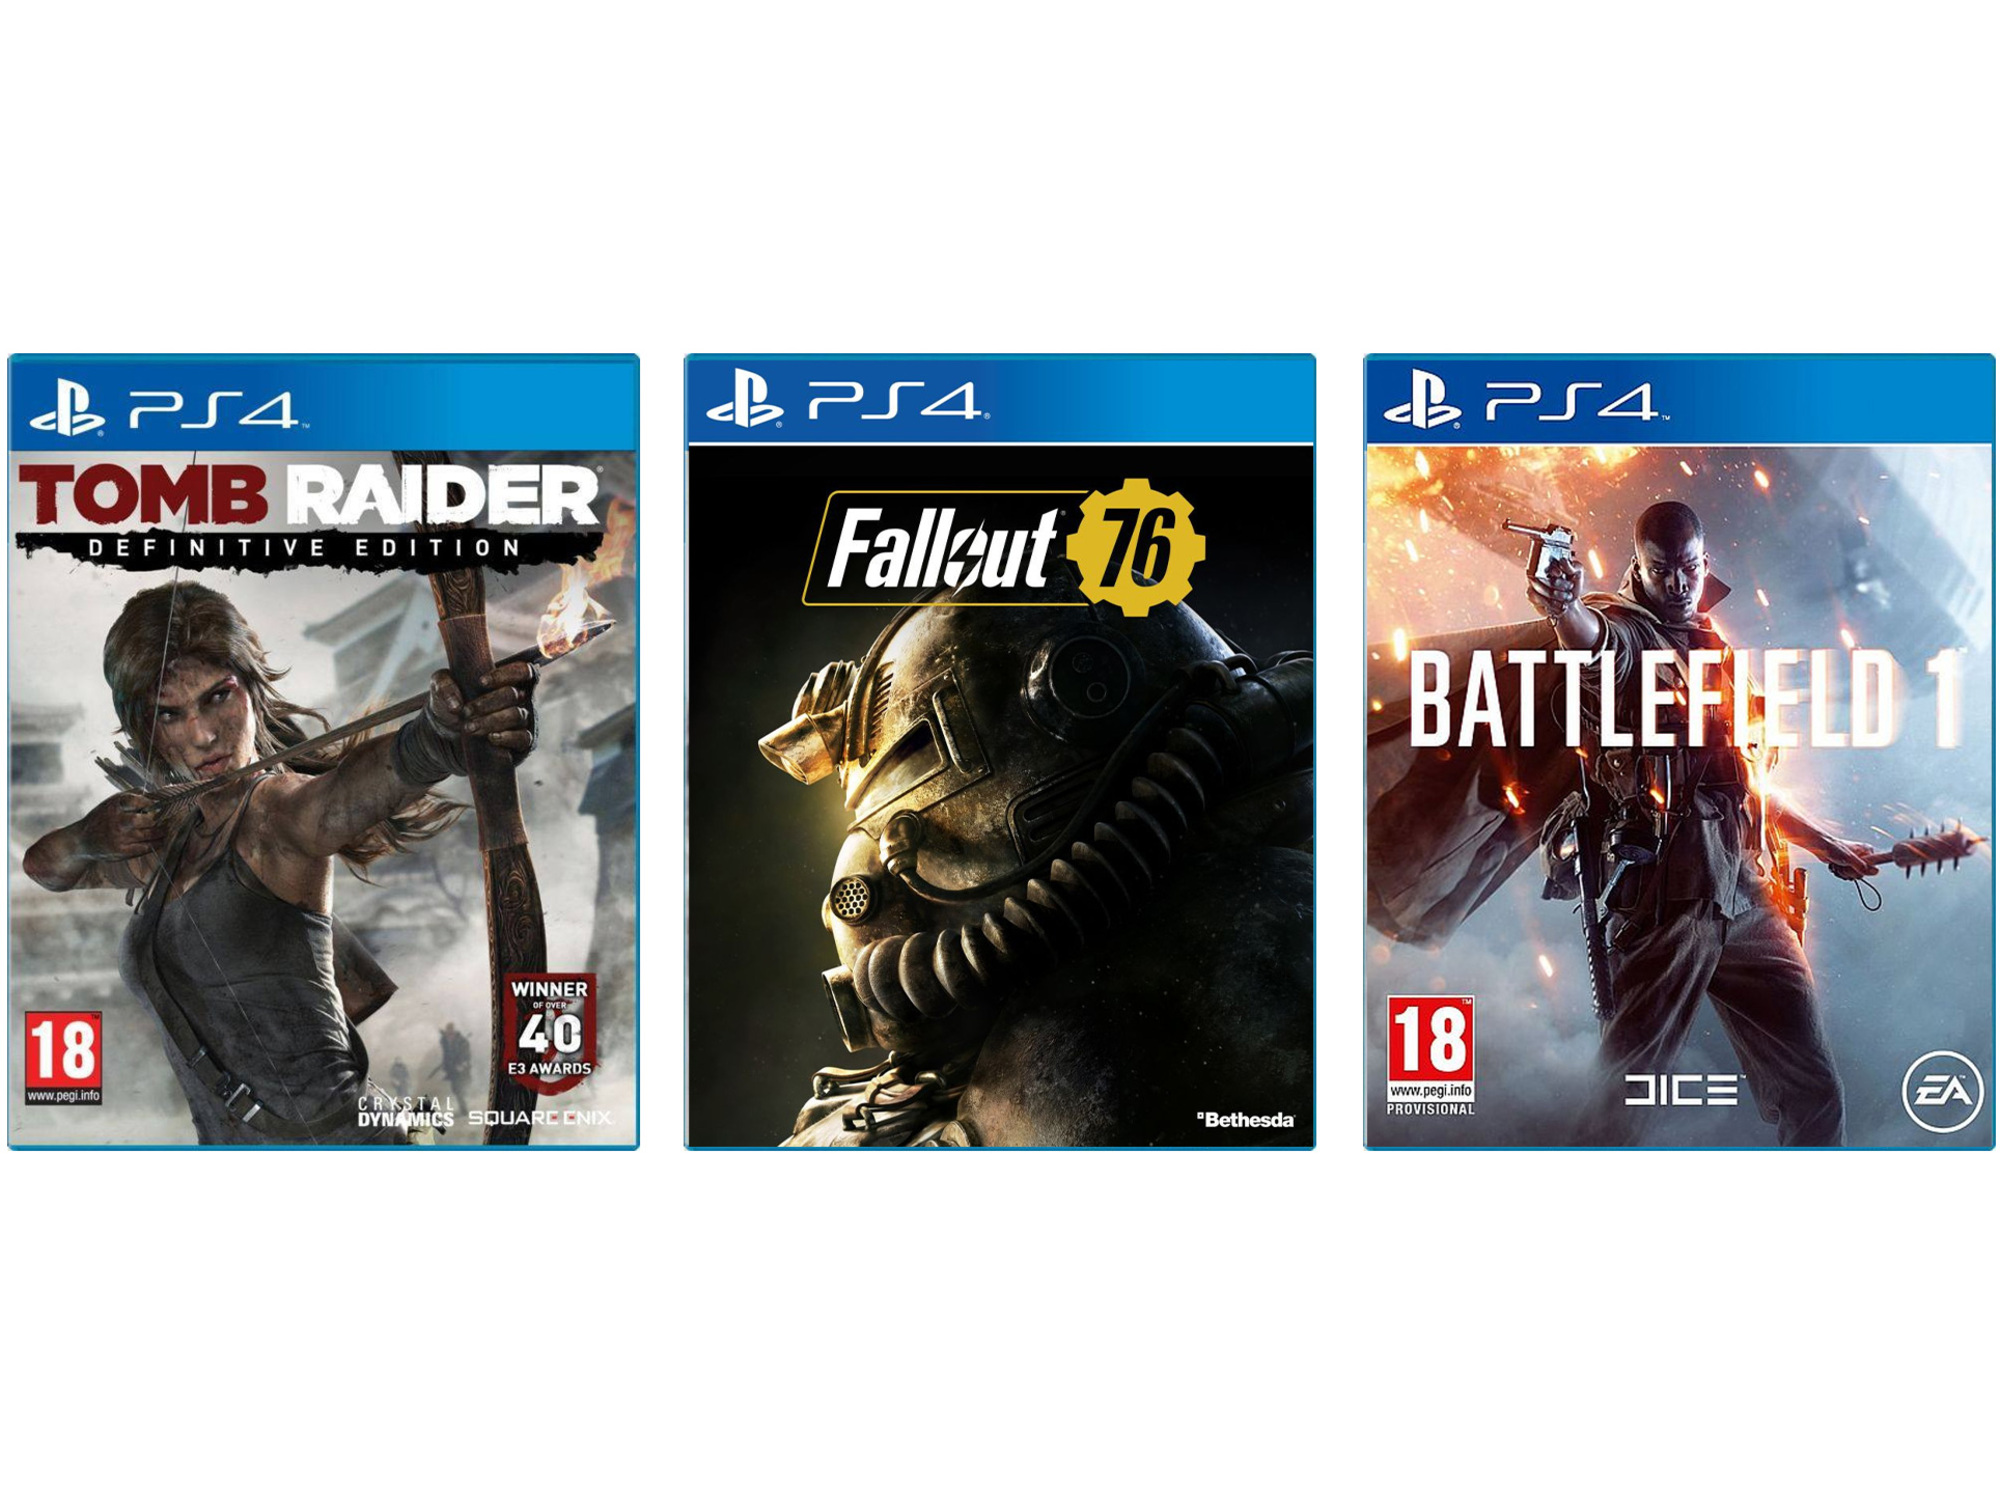 PS4 Battlefield 1 + PS4 Tomb Raider Definitive Edition + PS4 Fallout 76